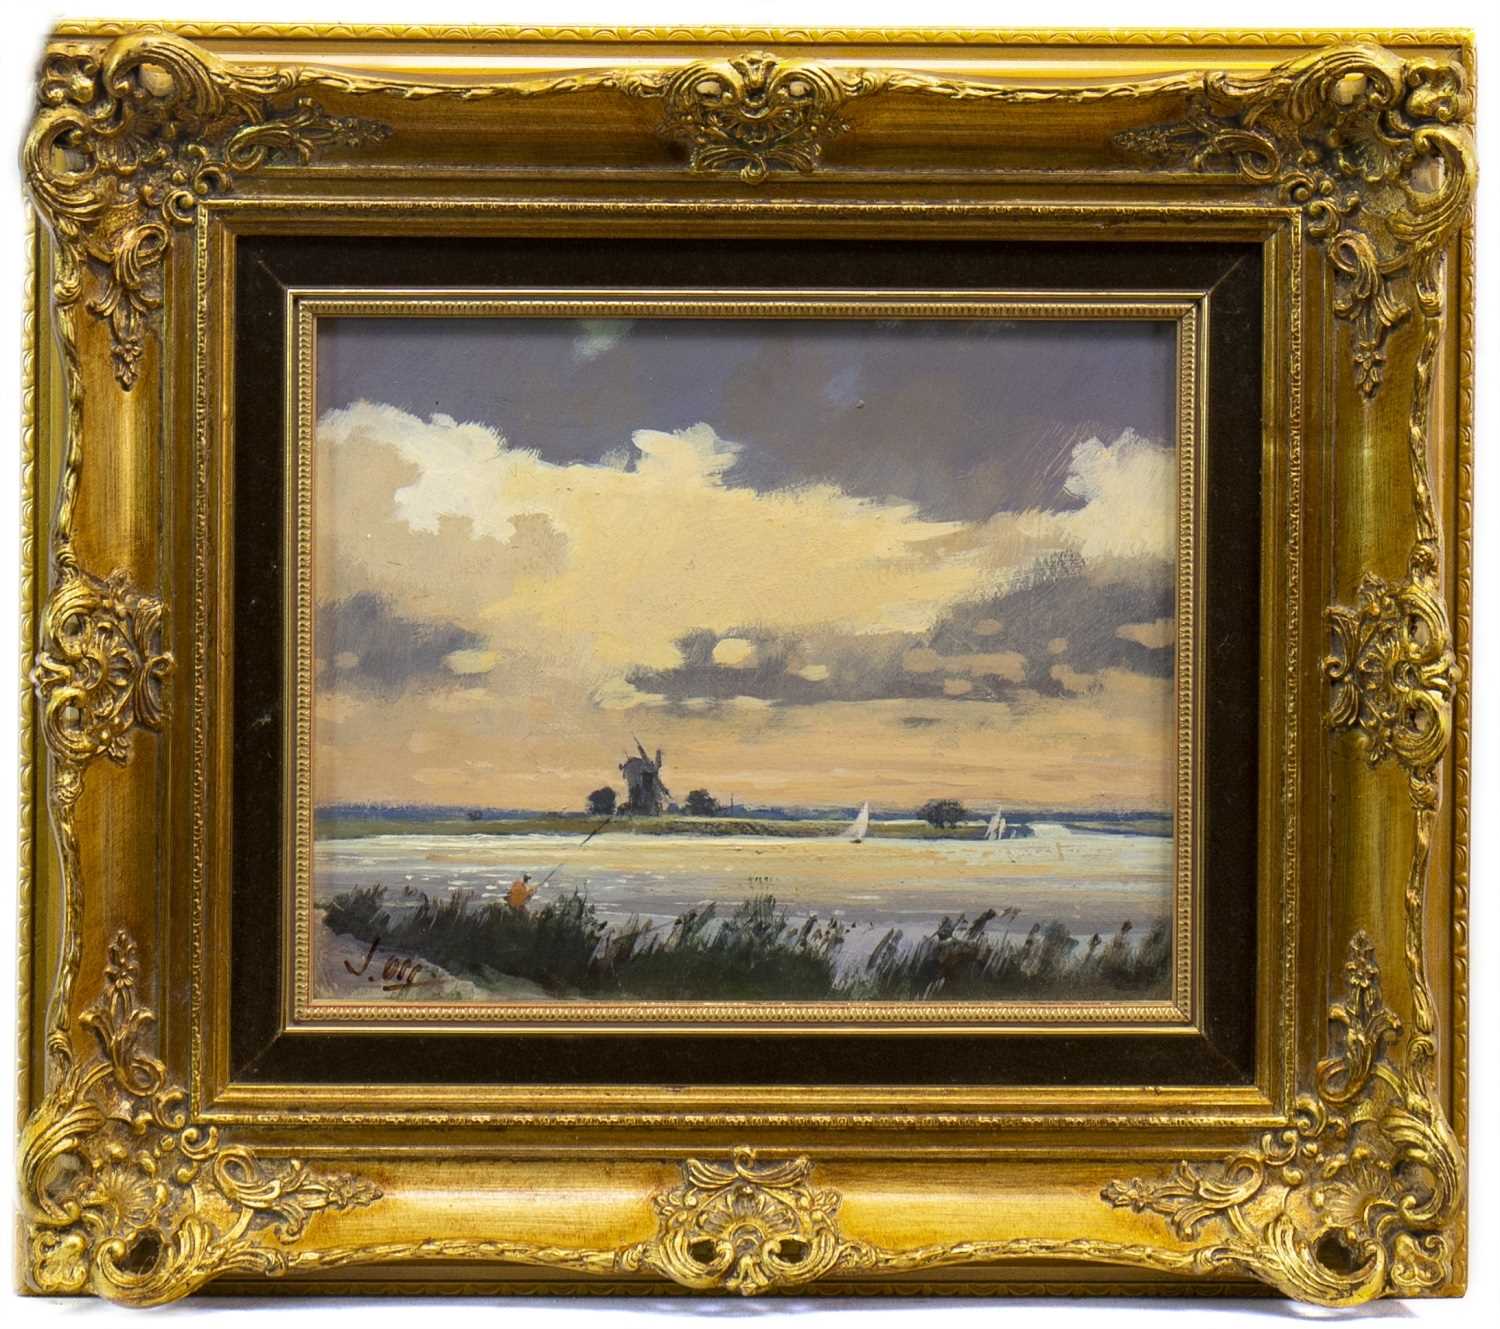 Lot 636 - FISHING AT THE SHORE, AN OIL BY JAMES ORR